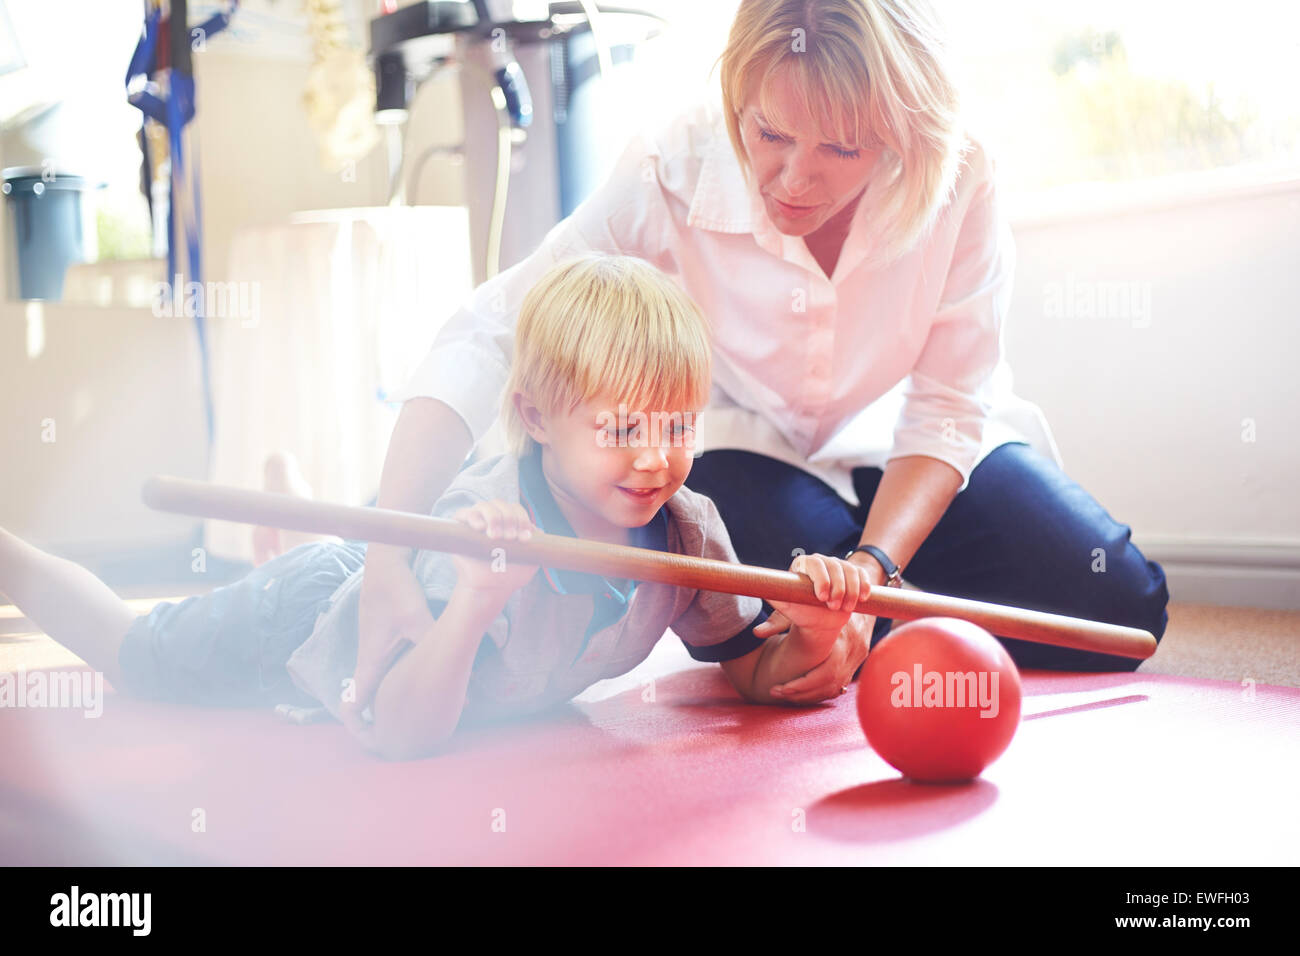 Physical therapist guiding boy rolling ball with stick Stock Photo